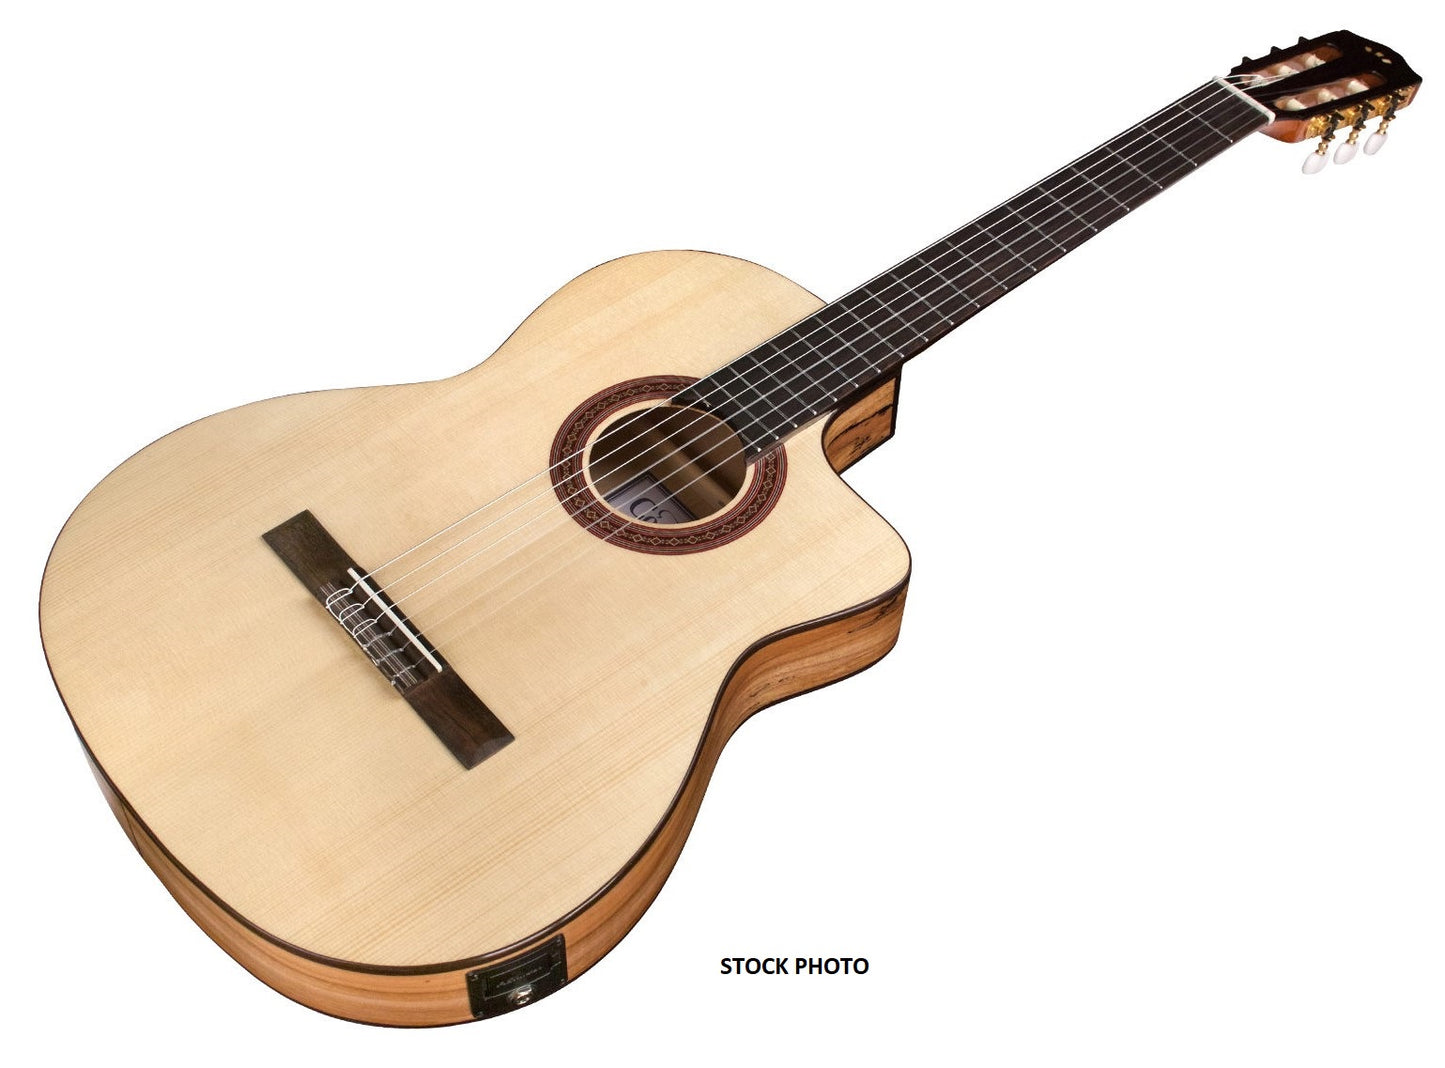 New Cordoba C5-CET Limited Thinbody Classical Spanish Acoustic Electric Cutaway Guitar